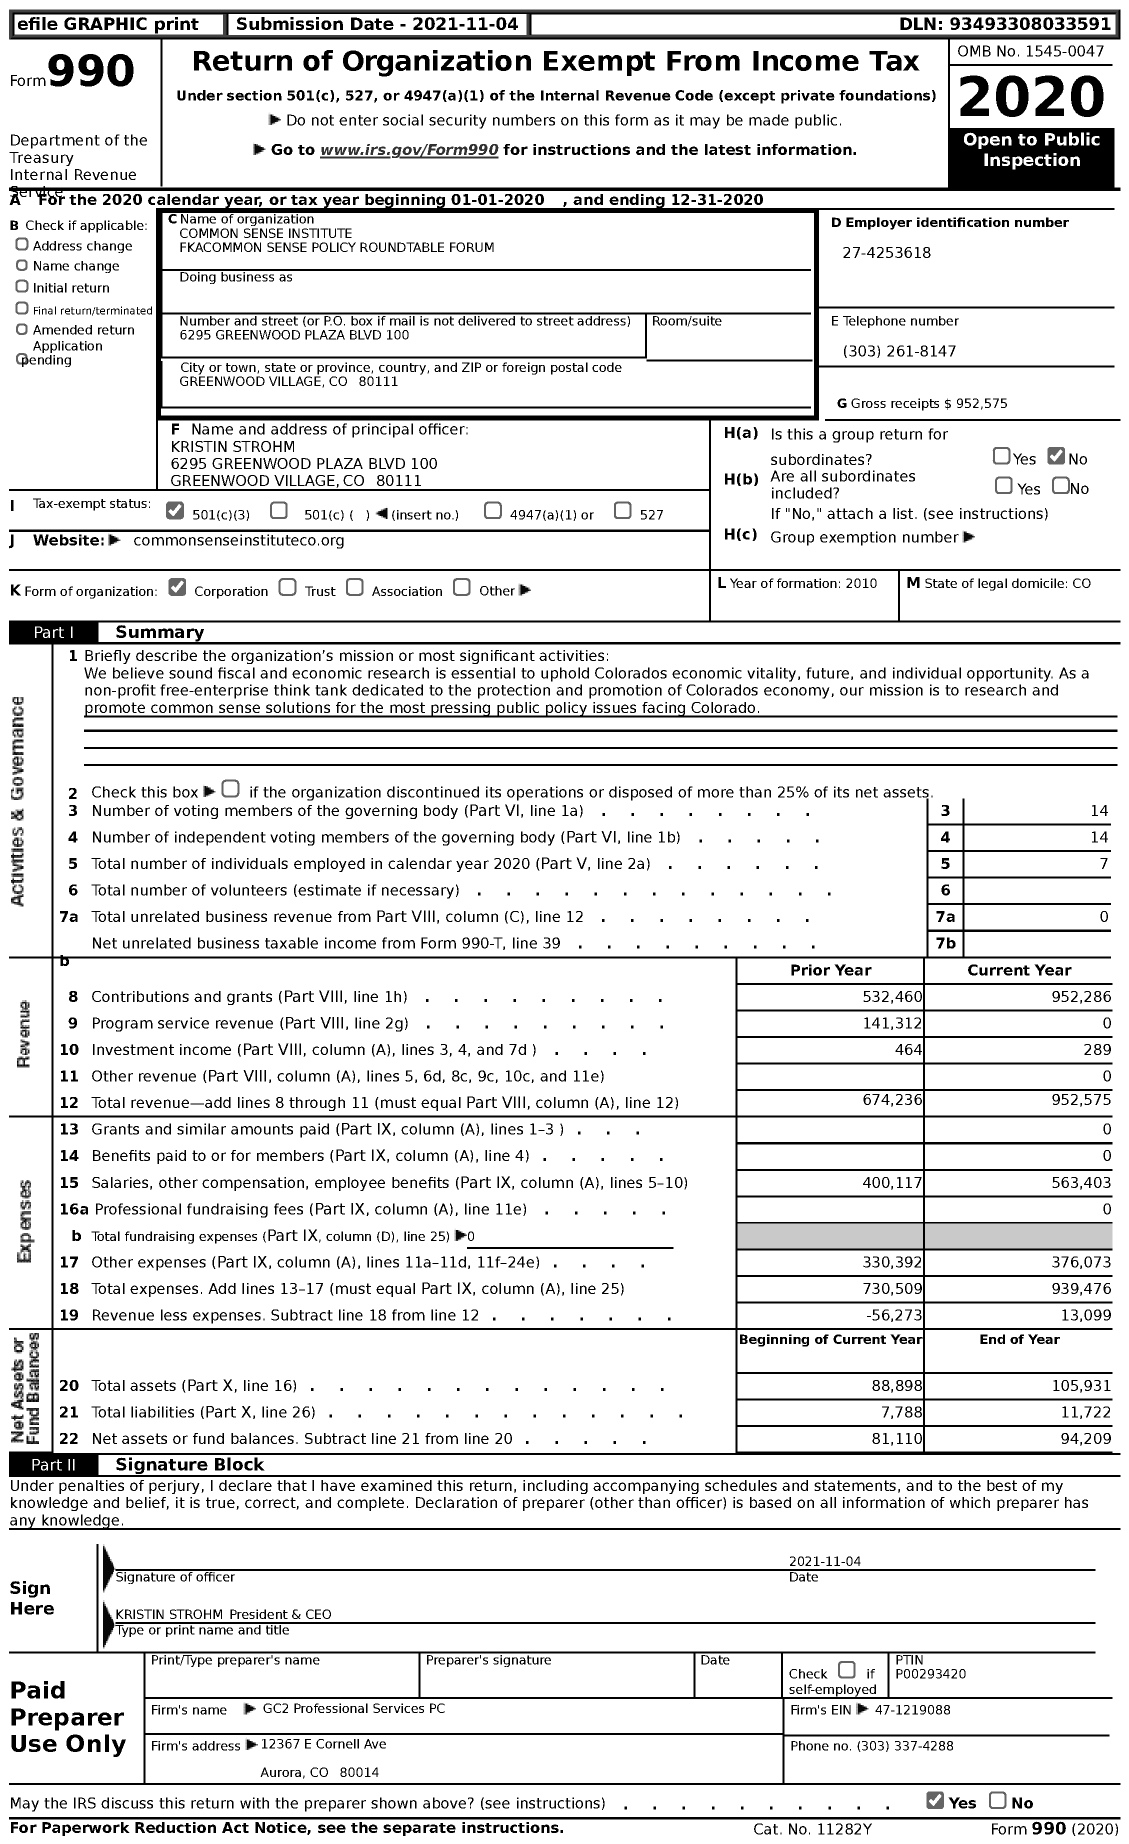 Image of first page of 2020 Form 990 for Common Sense Institute Fkacommon Sense Policy Roundtable Forum